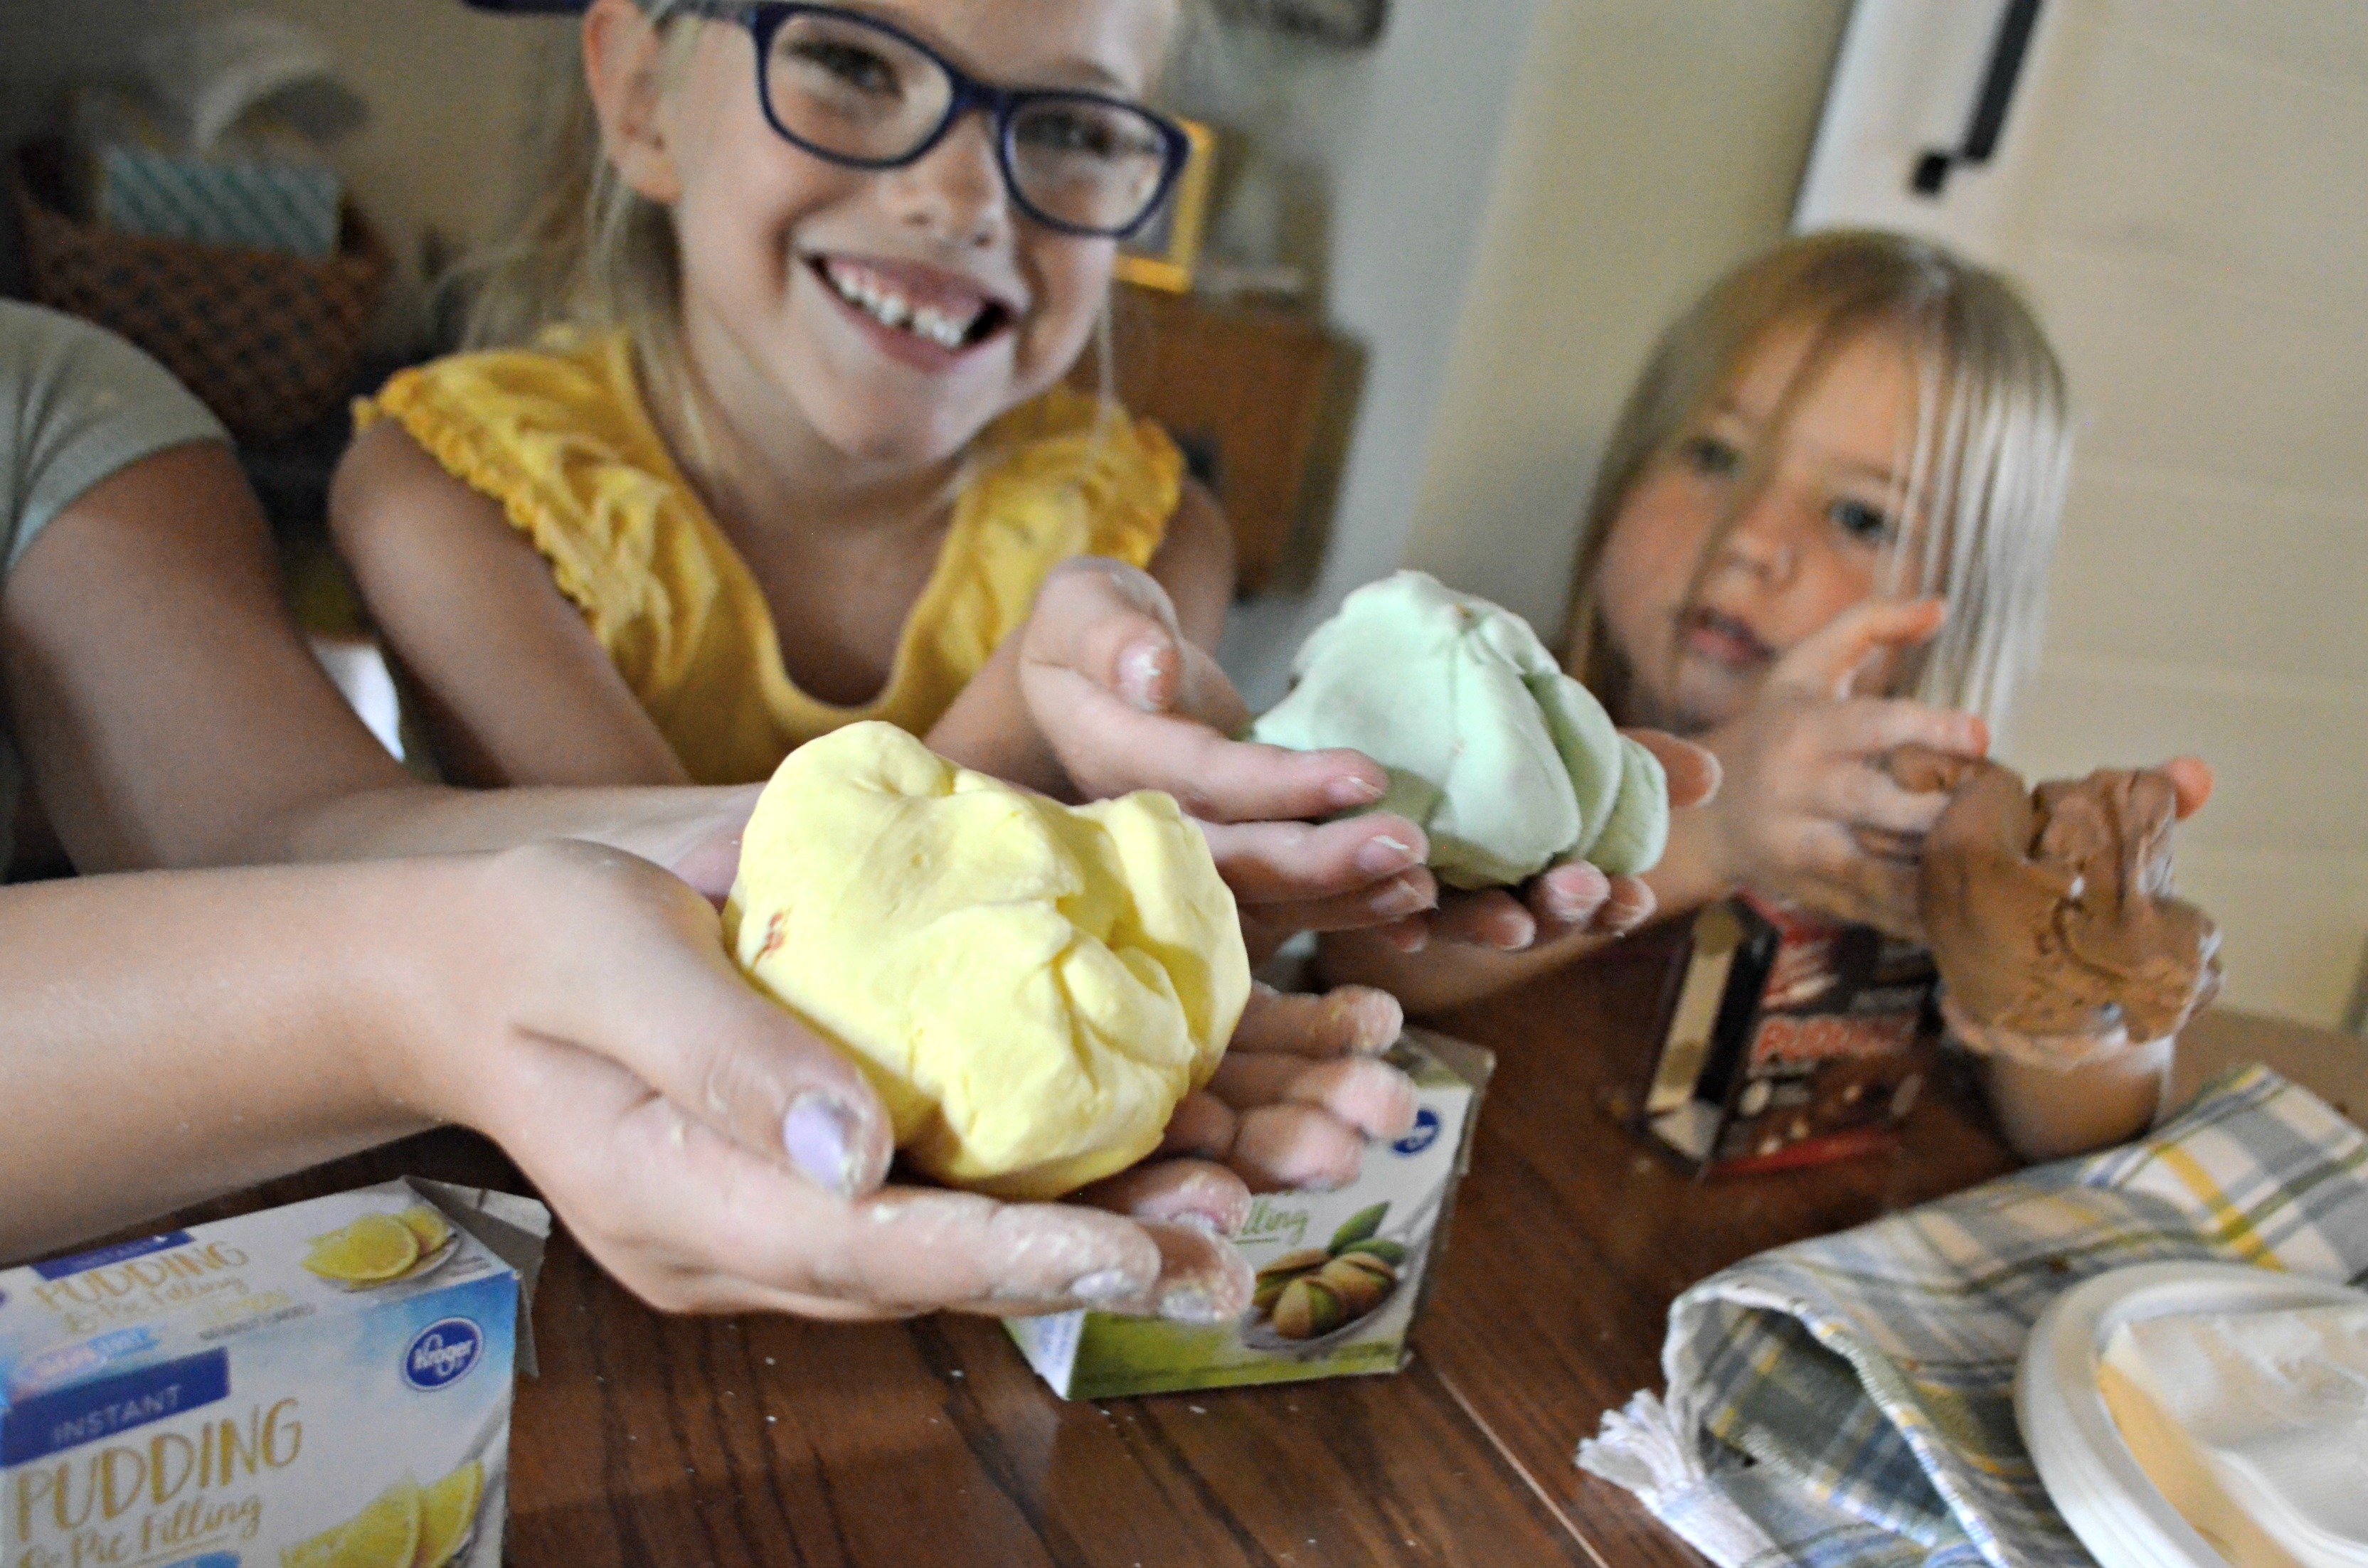 DIY play dough Pudding Slime – kids holding the slime in their hands